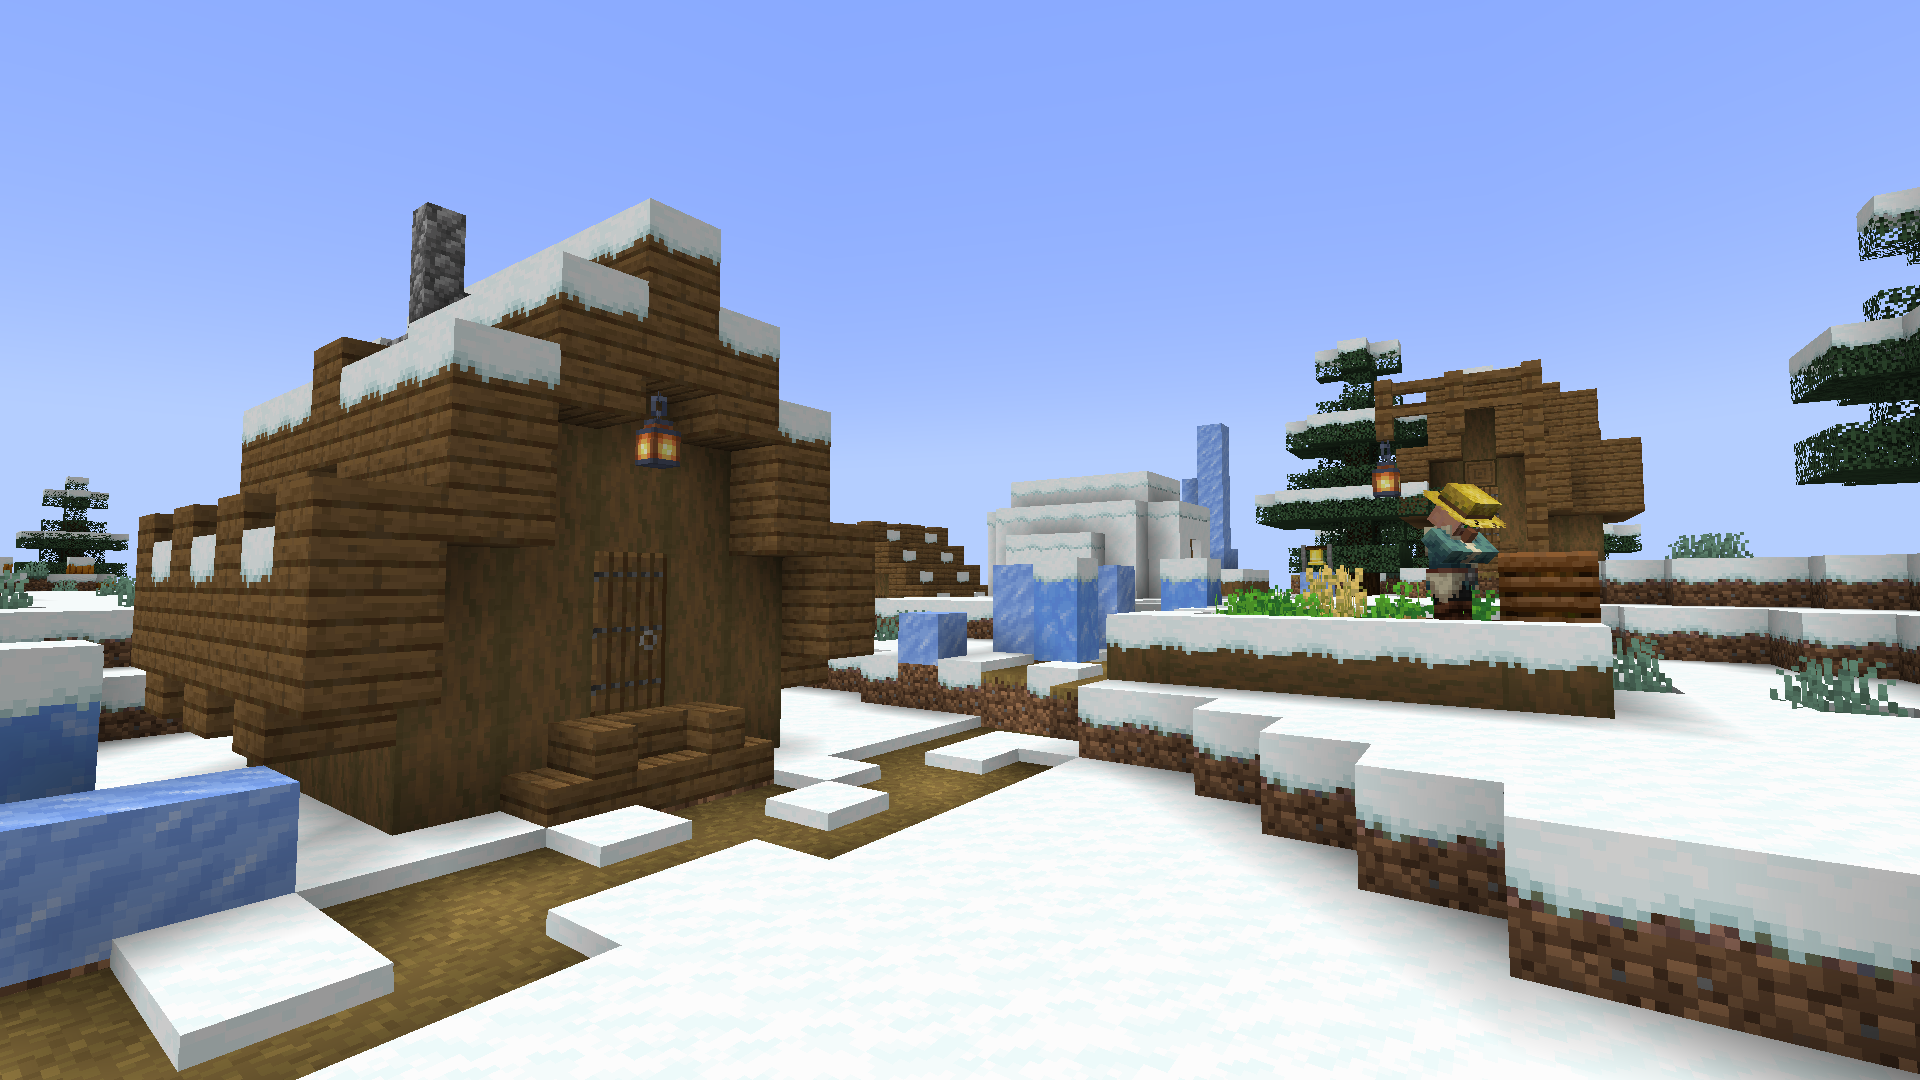 Breathe new life into the frozen parts of your Minecraft world!